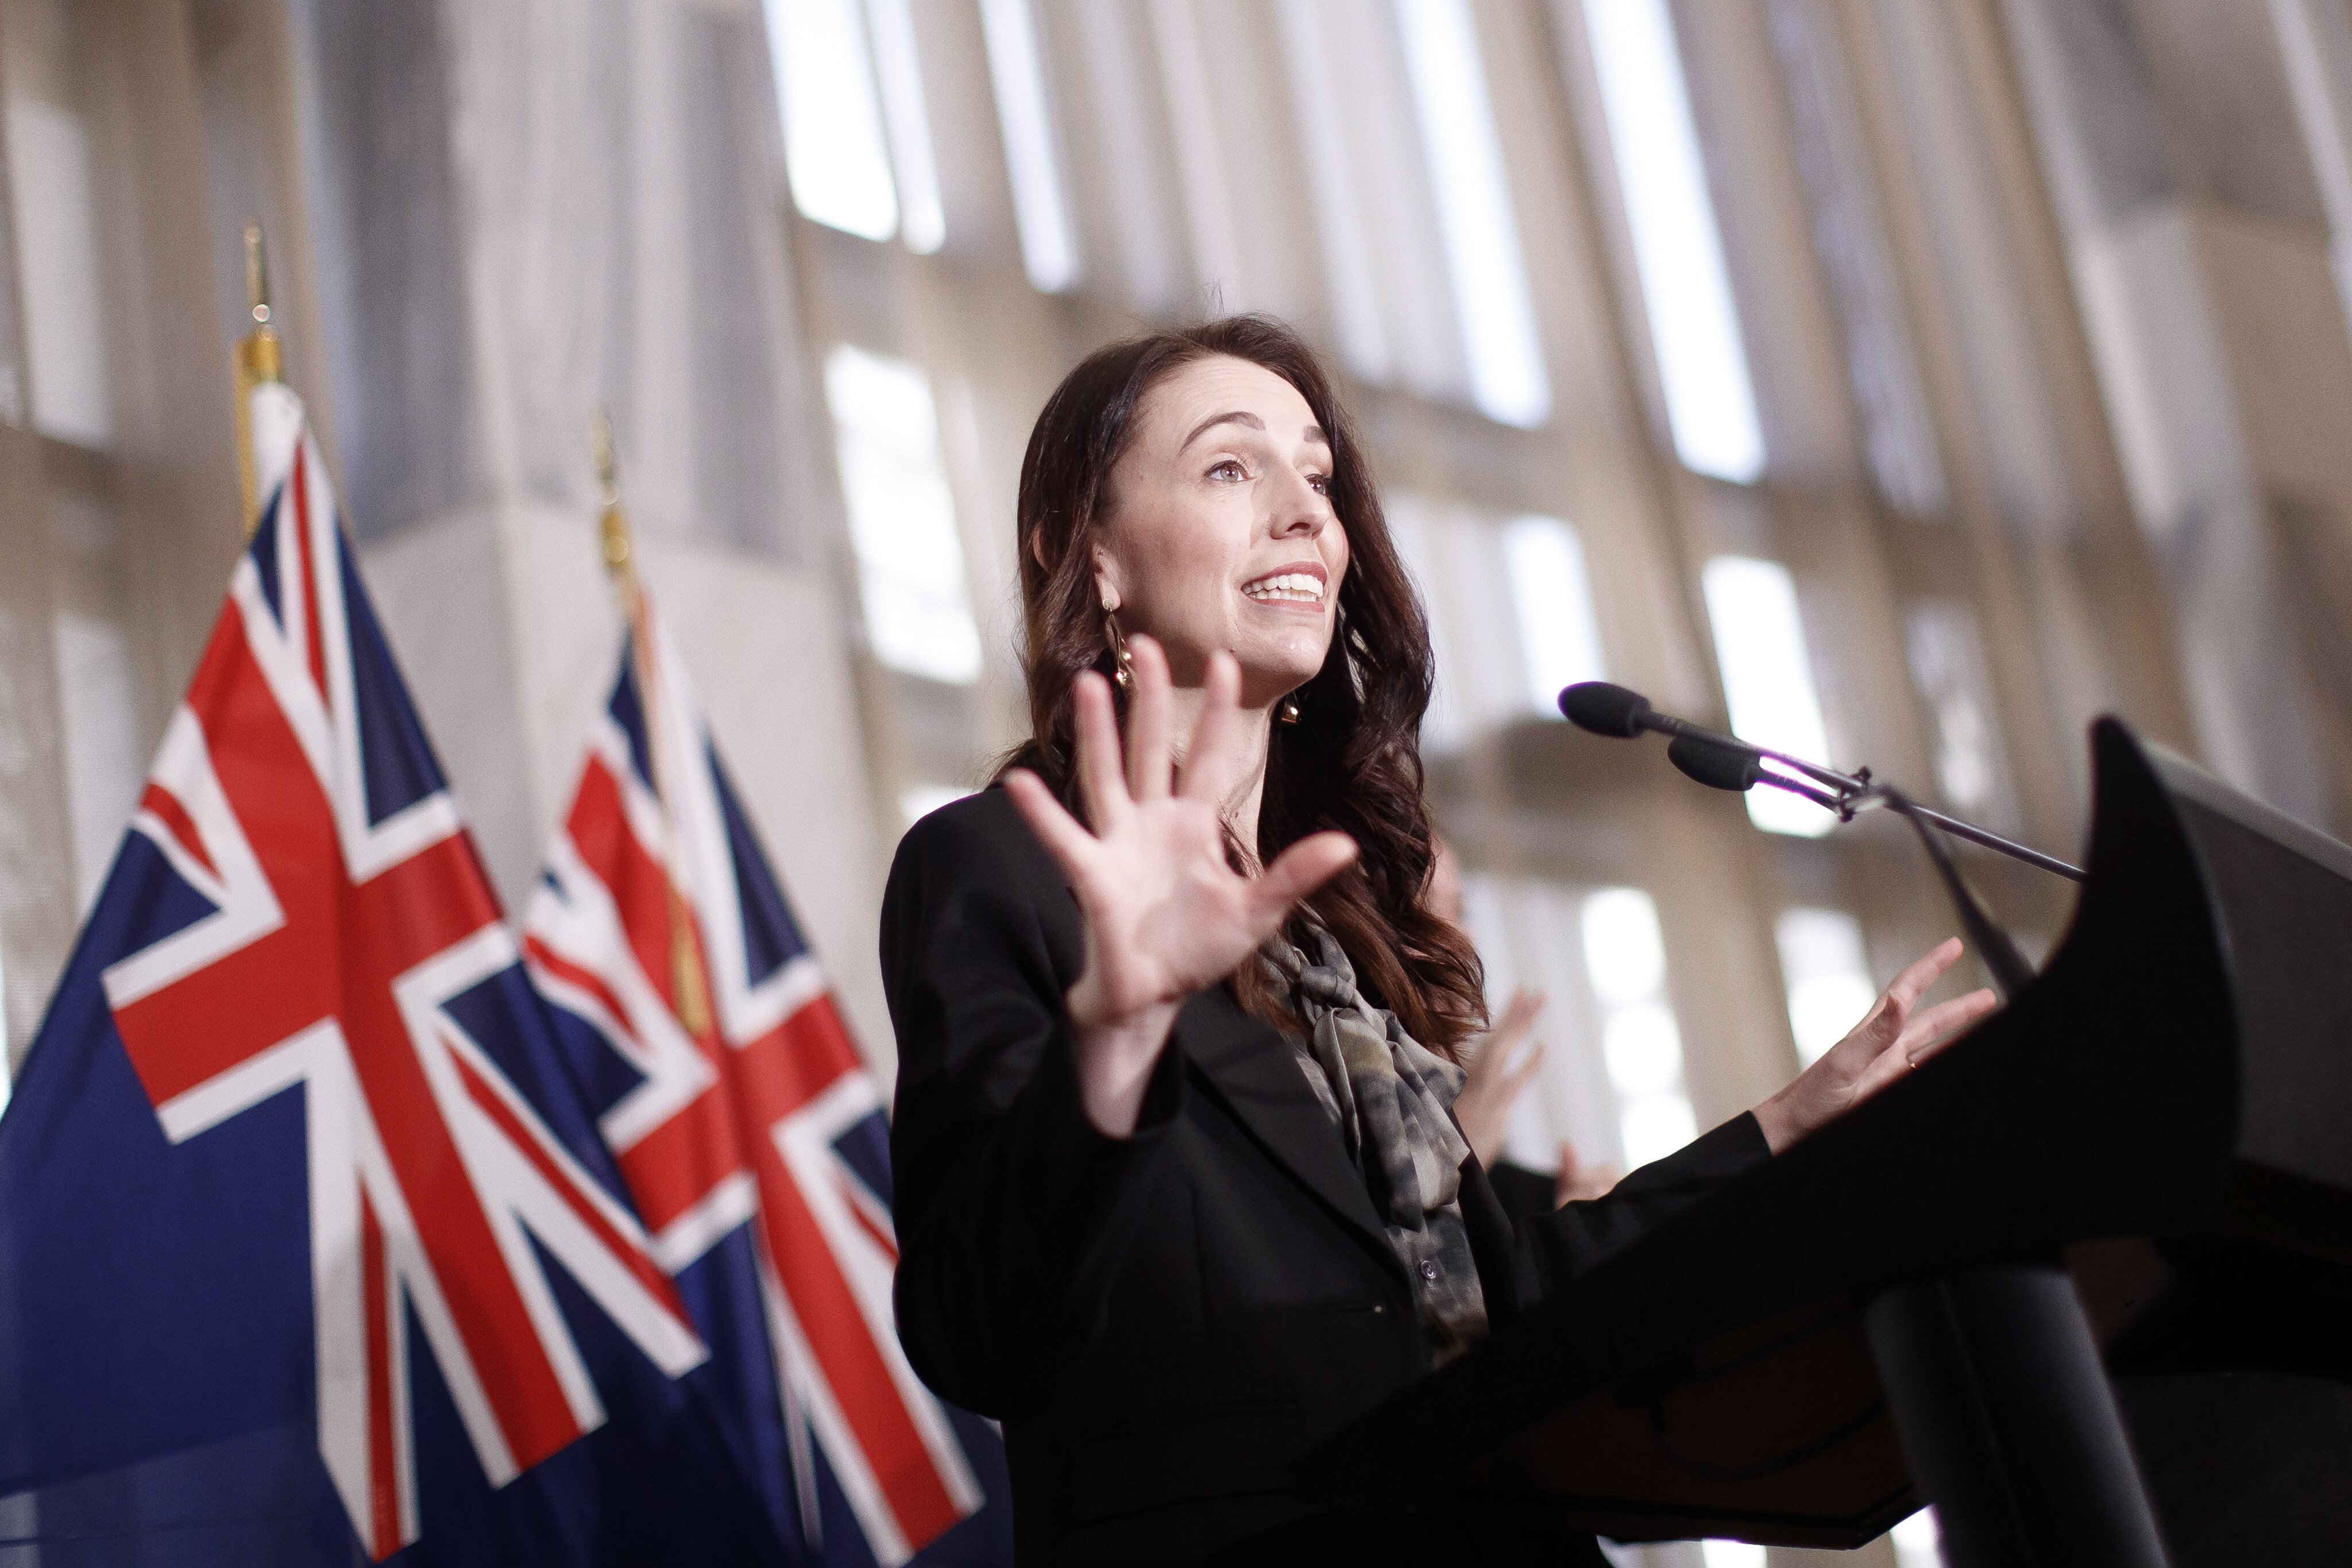 New Zealand Prime Minister Jacinda Ardern speaks at a press conference in Wellington on October 22. Under her leadership, the country has maintained friendly relations with Beijing and avoided joining anti-China initiatives. Photo: AP